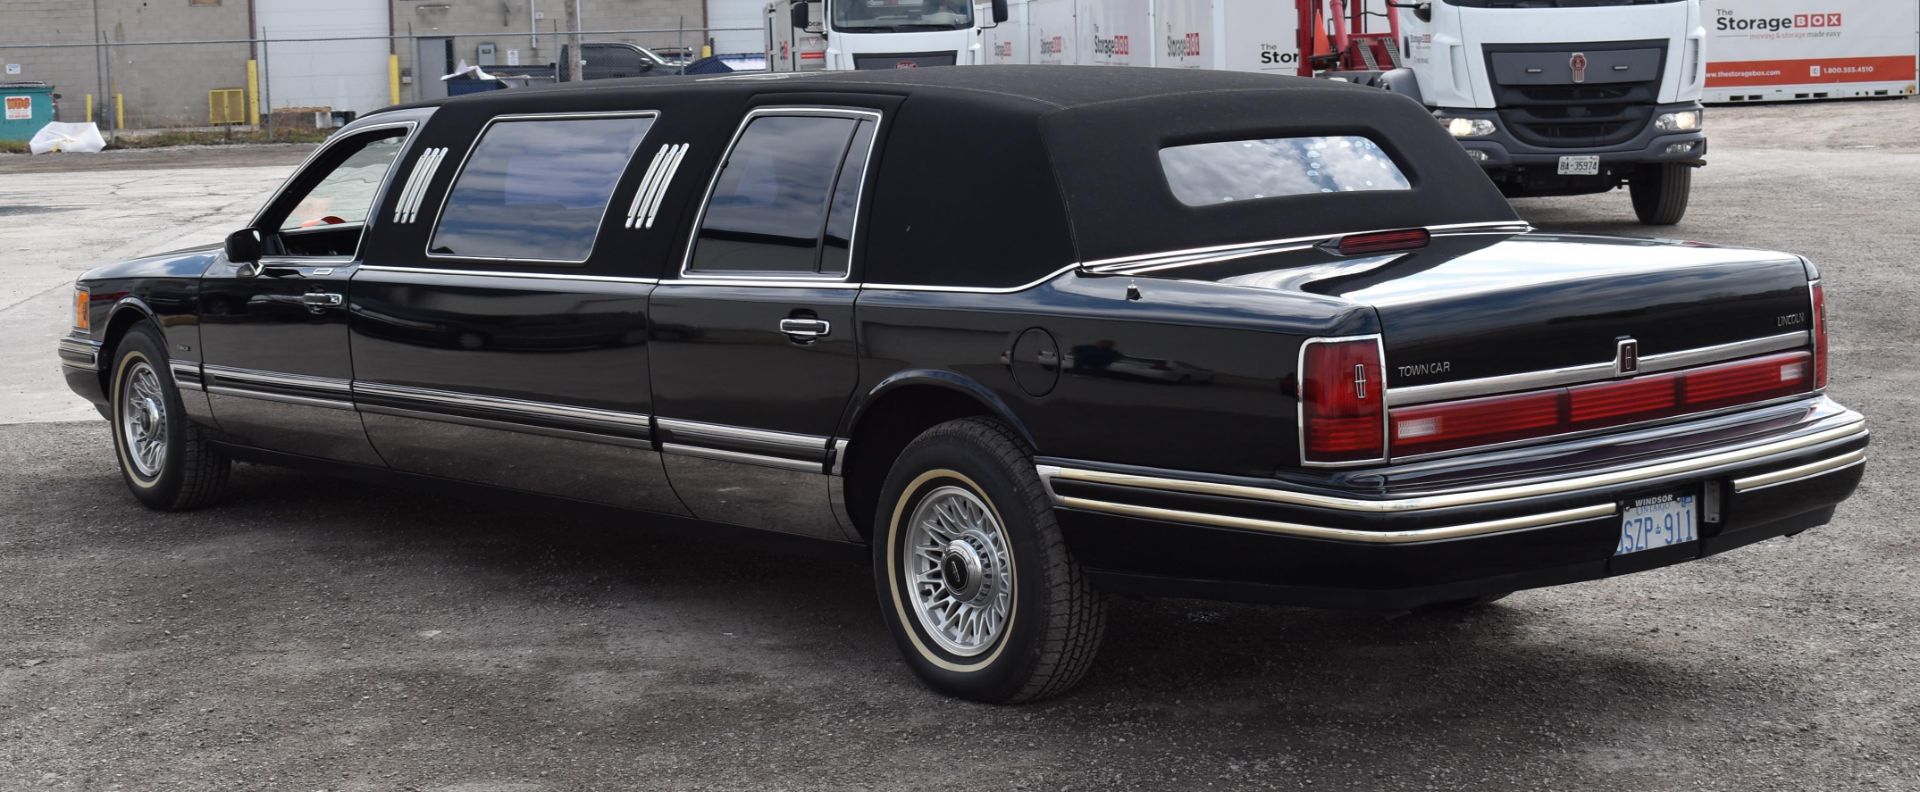 LINCOLN (1992) TOWN CAR 4 PASSENGER STRETCH LIMOUSINE WITH 8 CYLINDER 4.6L GAS ENGINE, 321,116KM ( - Image 6 of 21